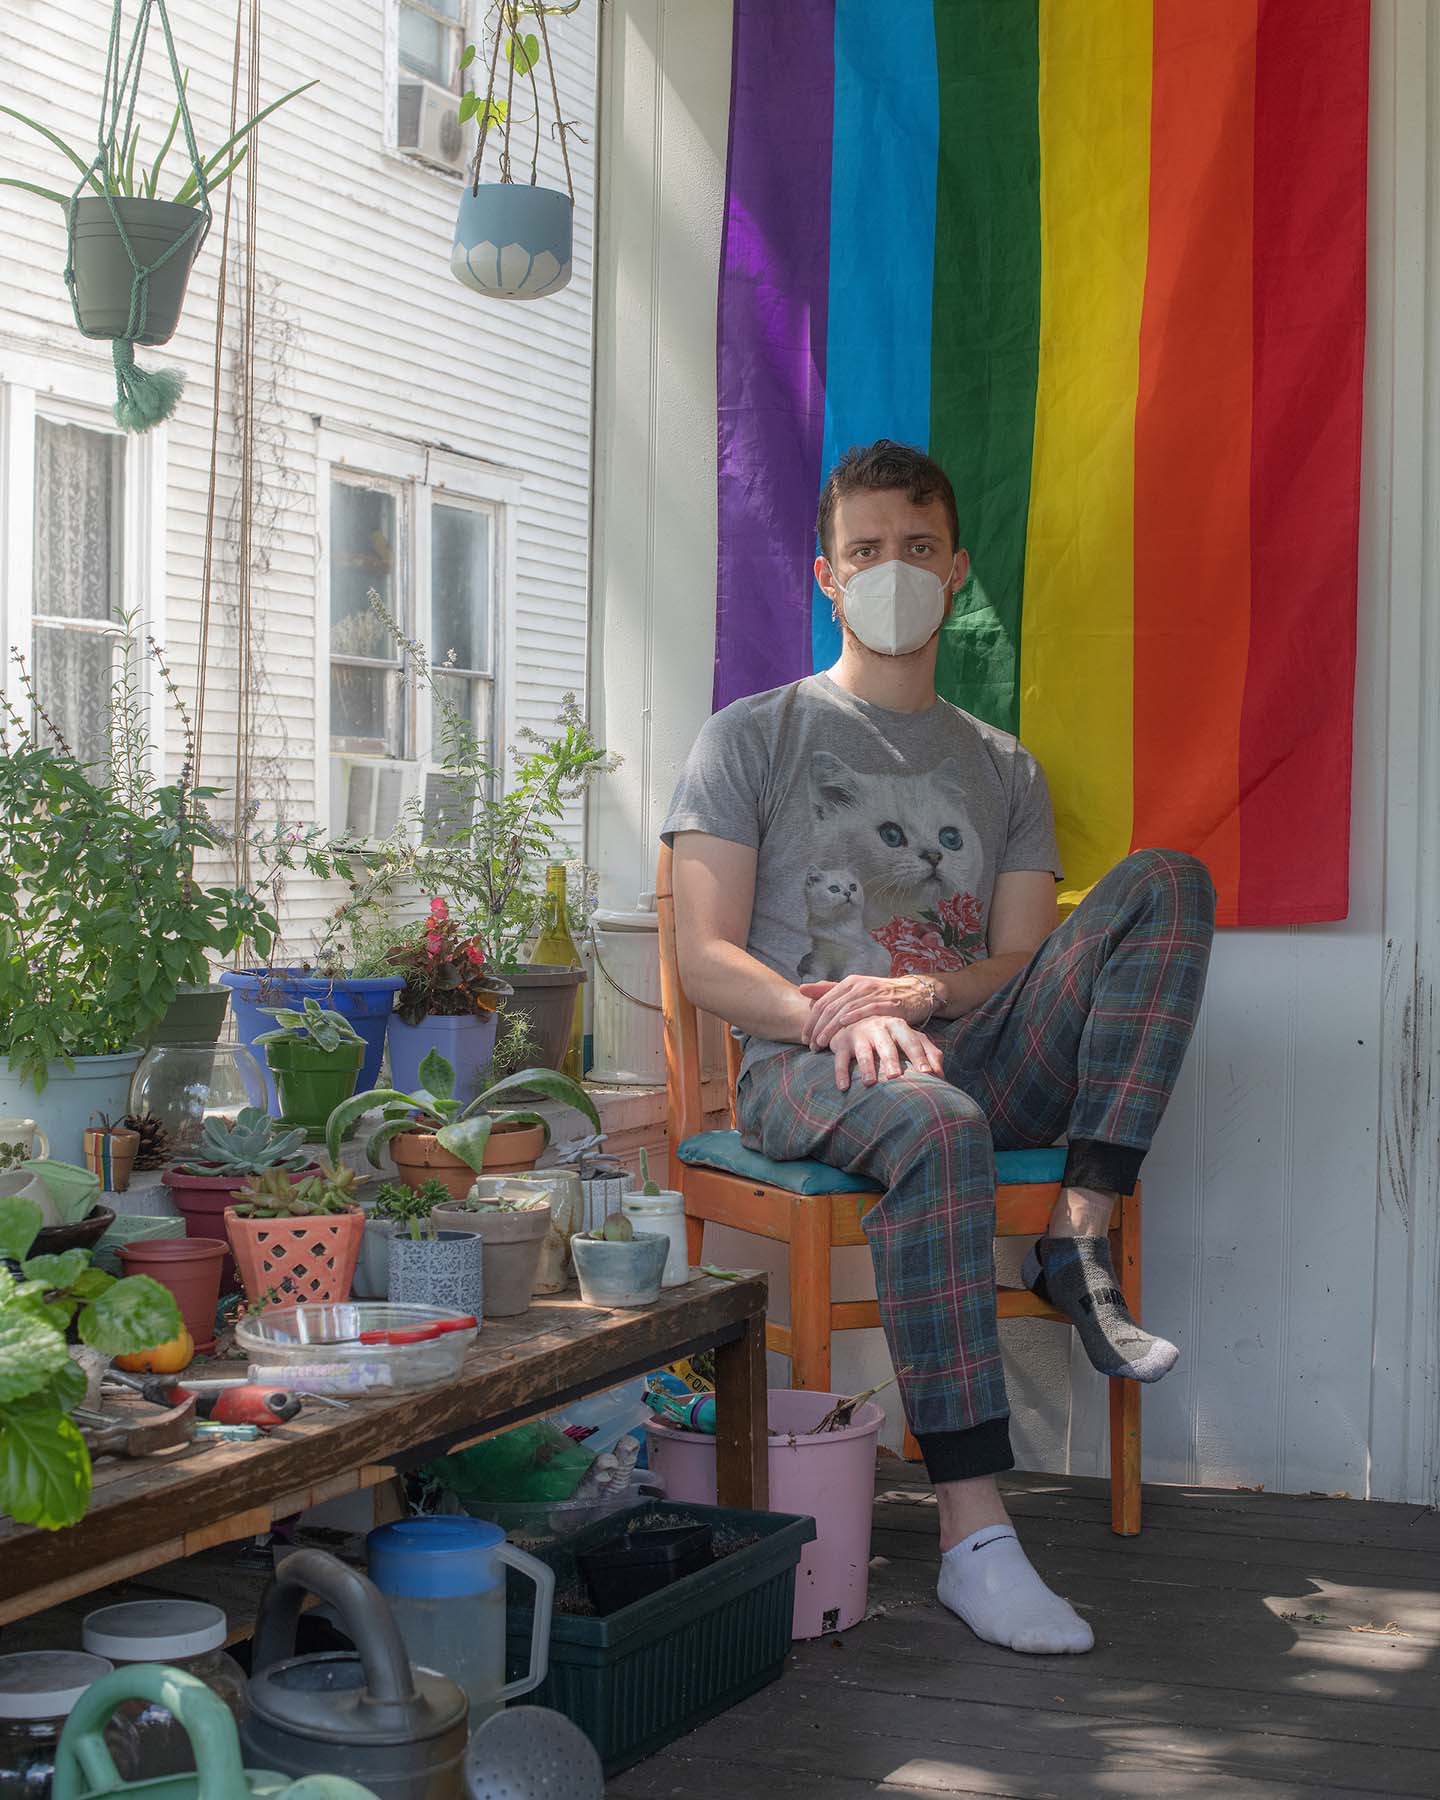 Marco Omta posing with his residence's pride flag for a portrait